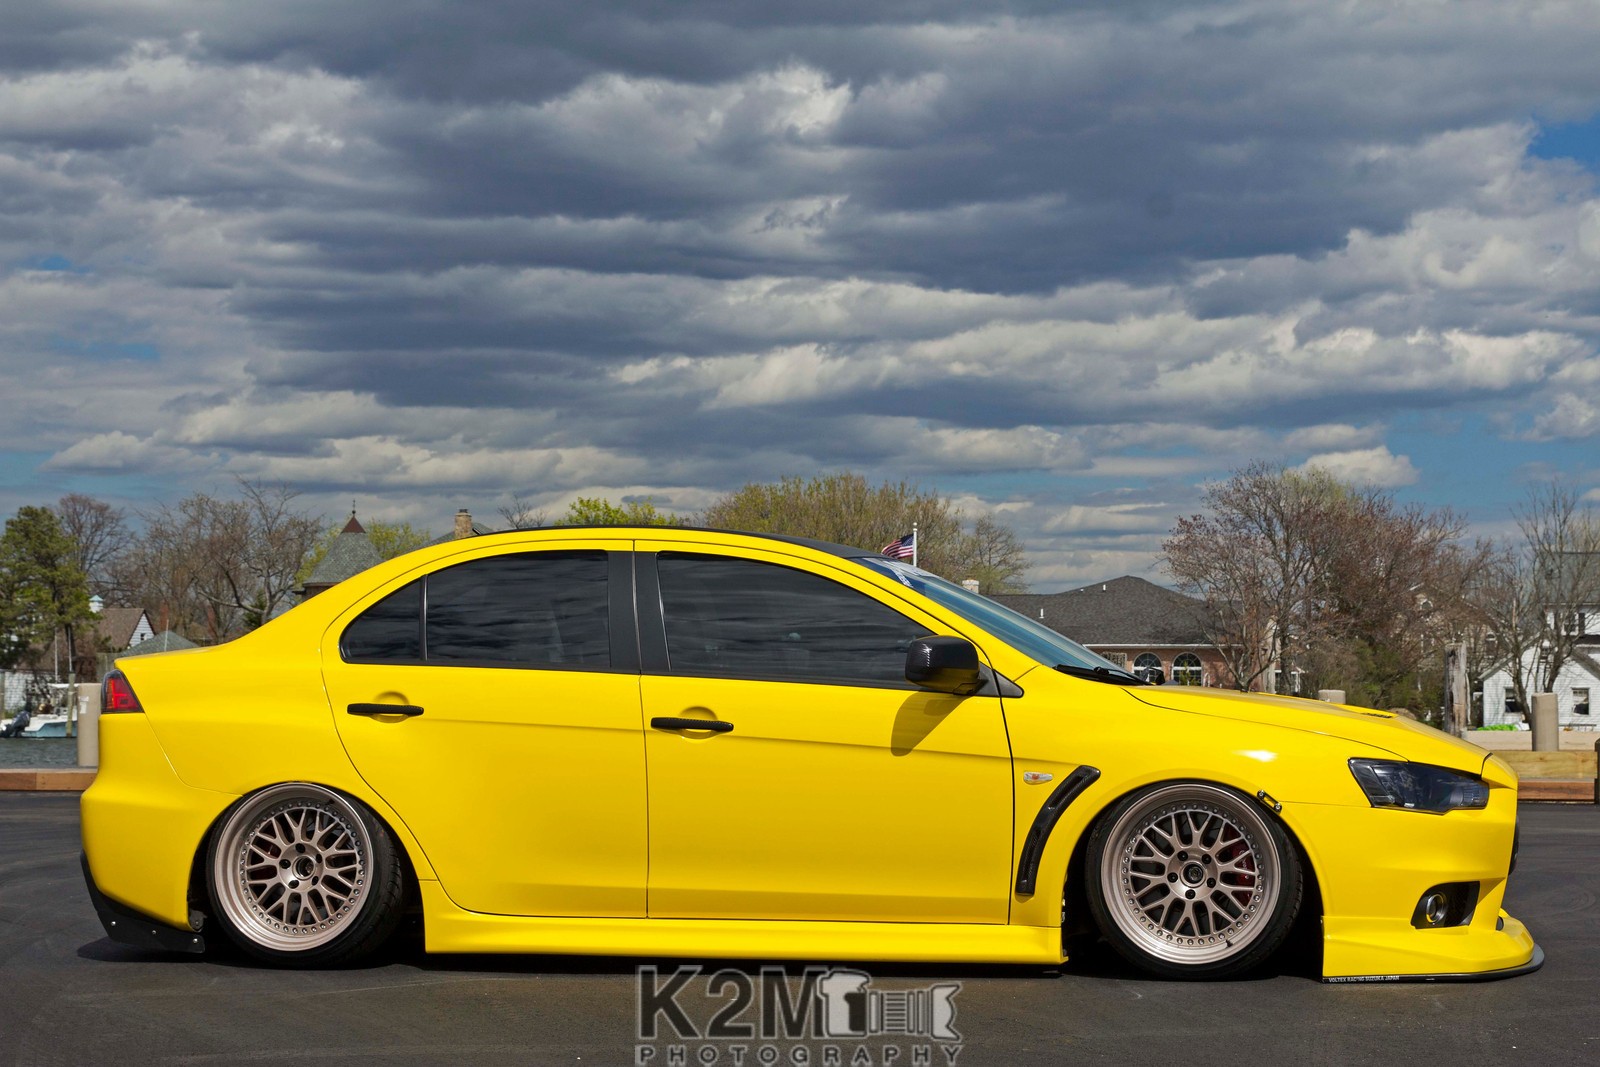 General 1600x1067 car stance (cars) yellow cars Mitsubishi Lancer Evo X Mitsubishi vehicle Mitsubishi Lancer Japanese cars